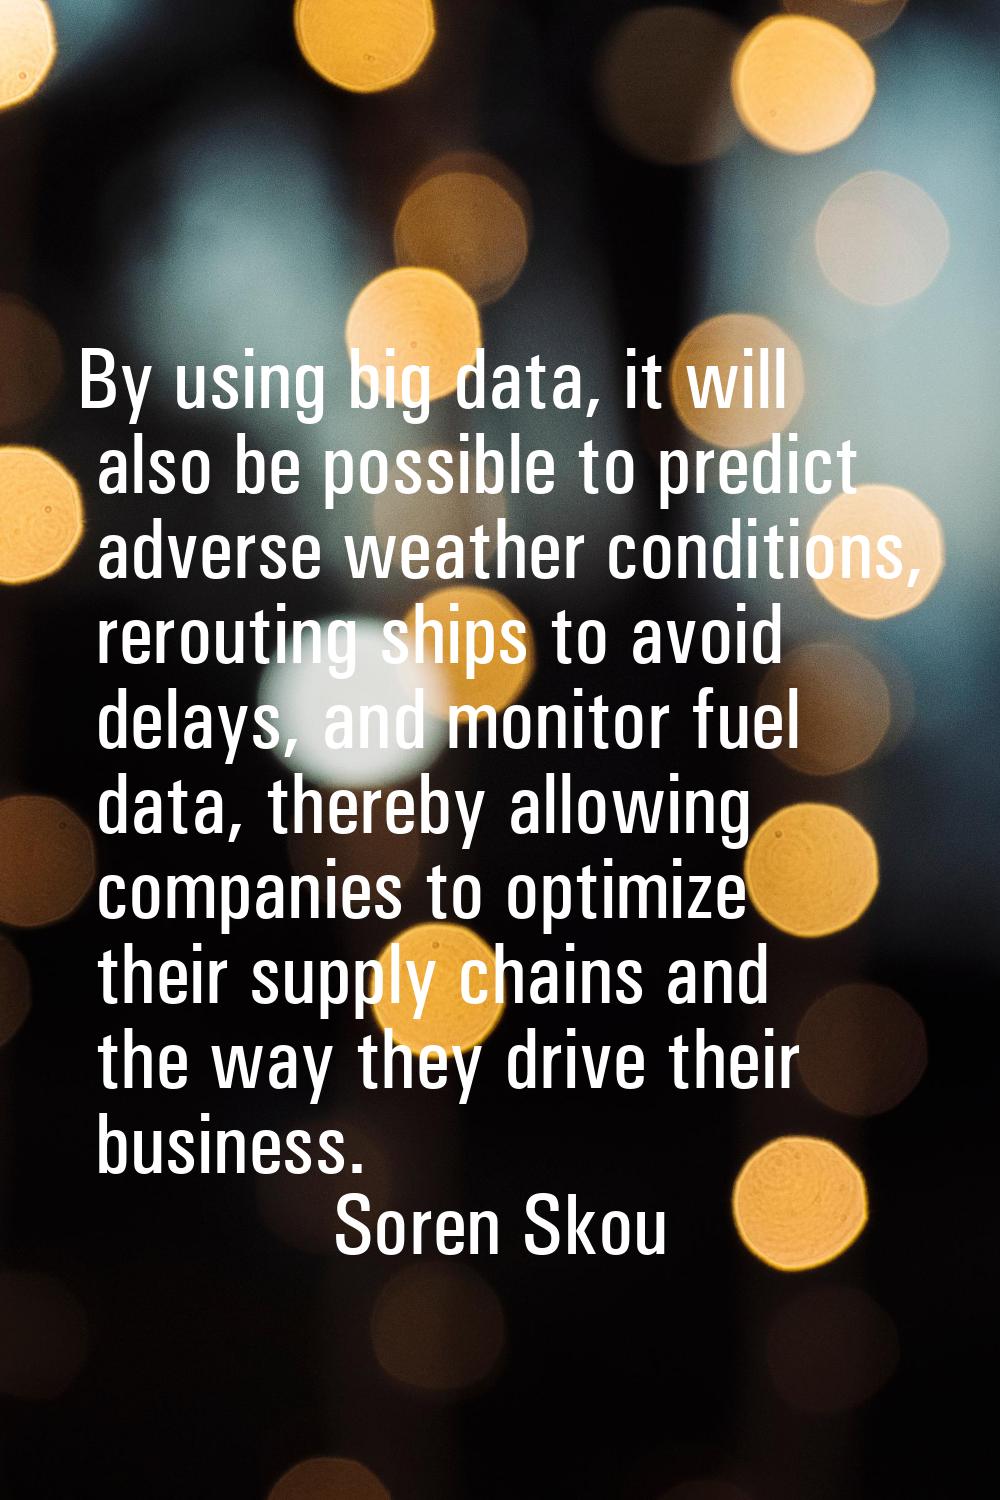 By using big data, it will also be possible to predict adverse weather conditions, rerouting ships 